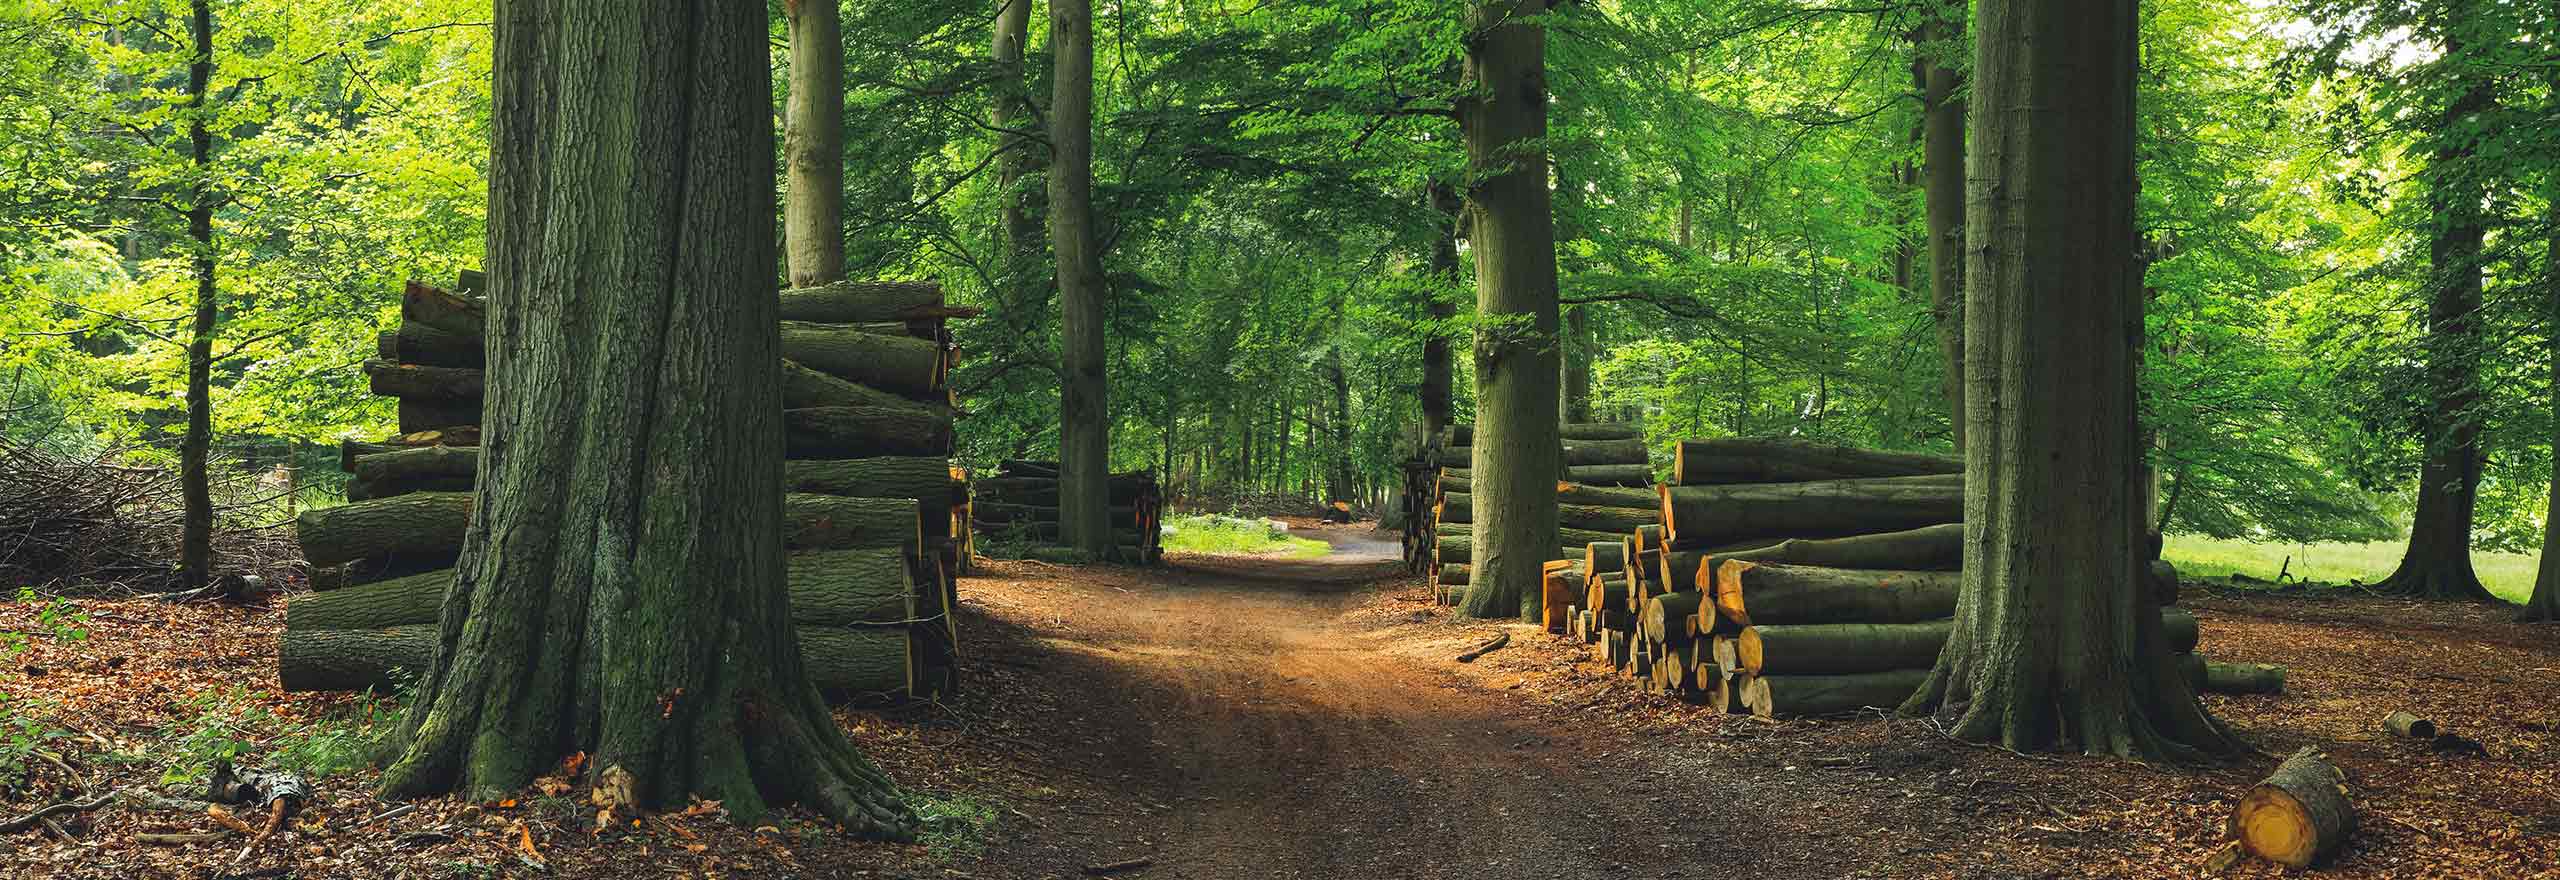 Green forest with cut trees and lumber piles 